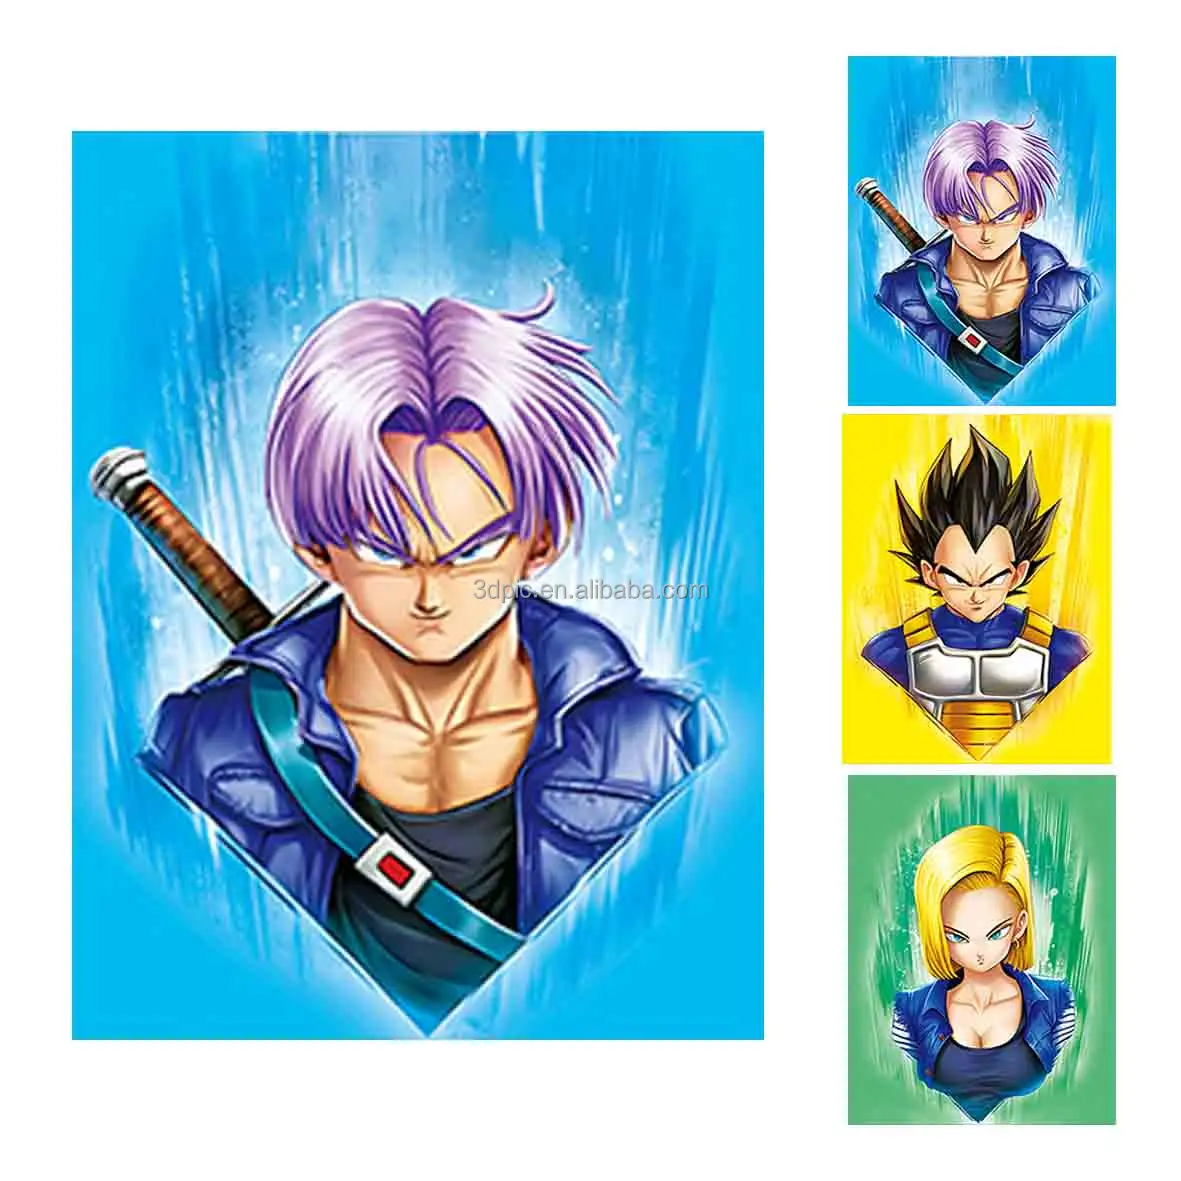 300 Designs Wholesale Anime 3D Poster Manga 3D Lenticular Poster Wall Decor 3D Print Changing Picture Anime Poster